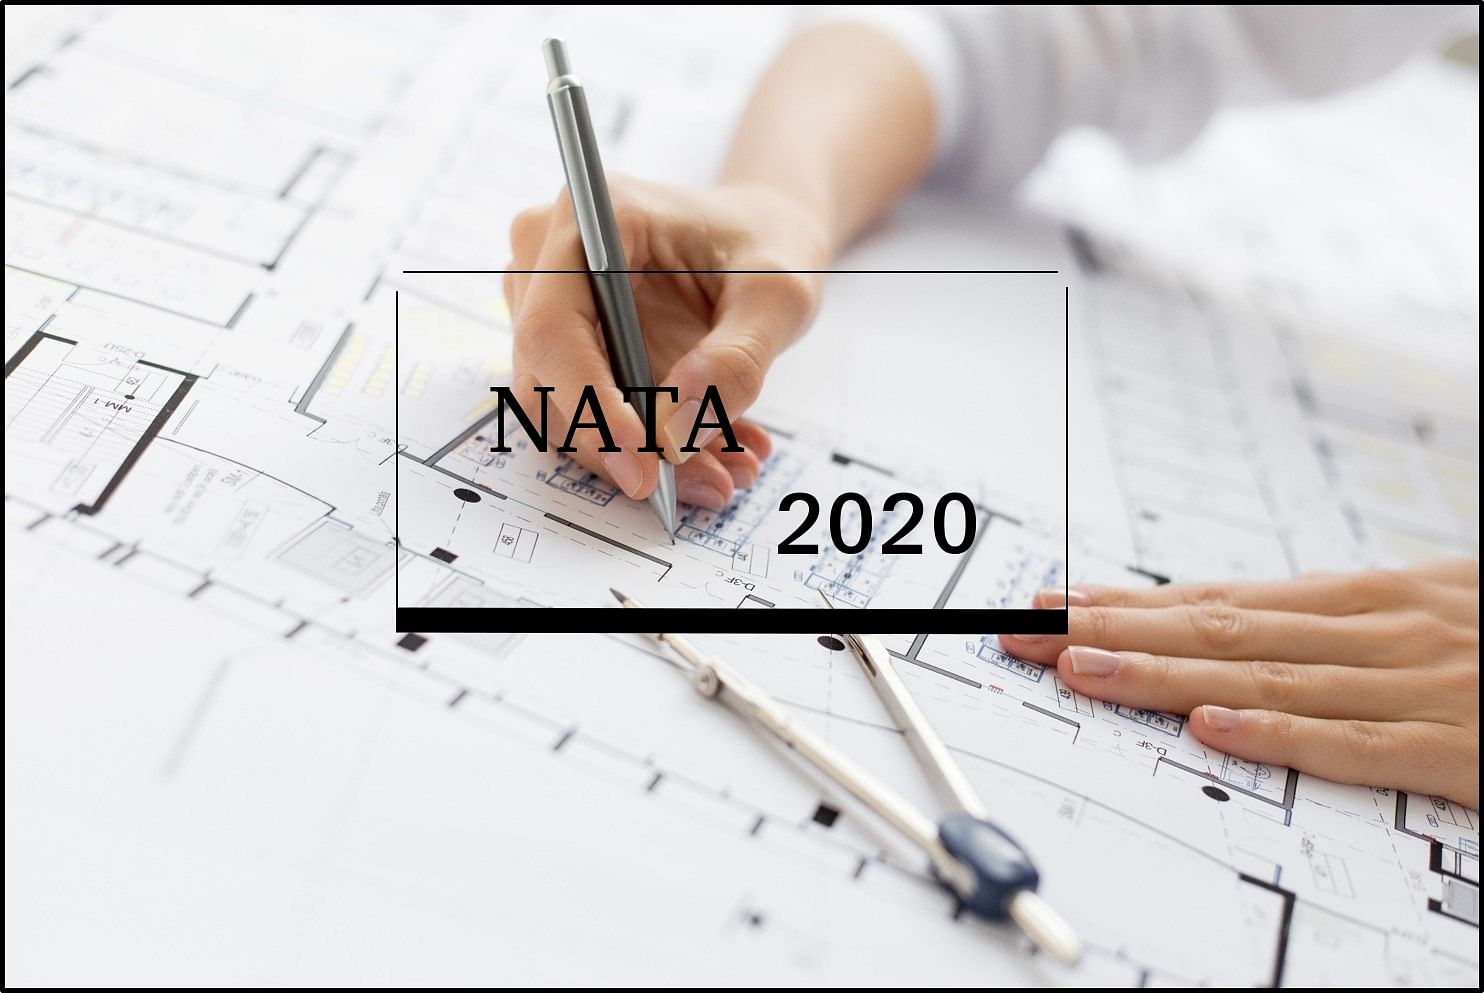 NATA 2020 Second Test Result Expected Anytime Soon, Know How to Check